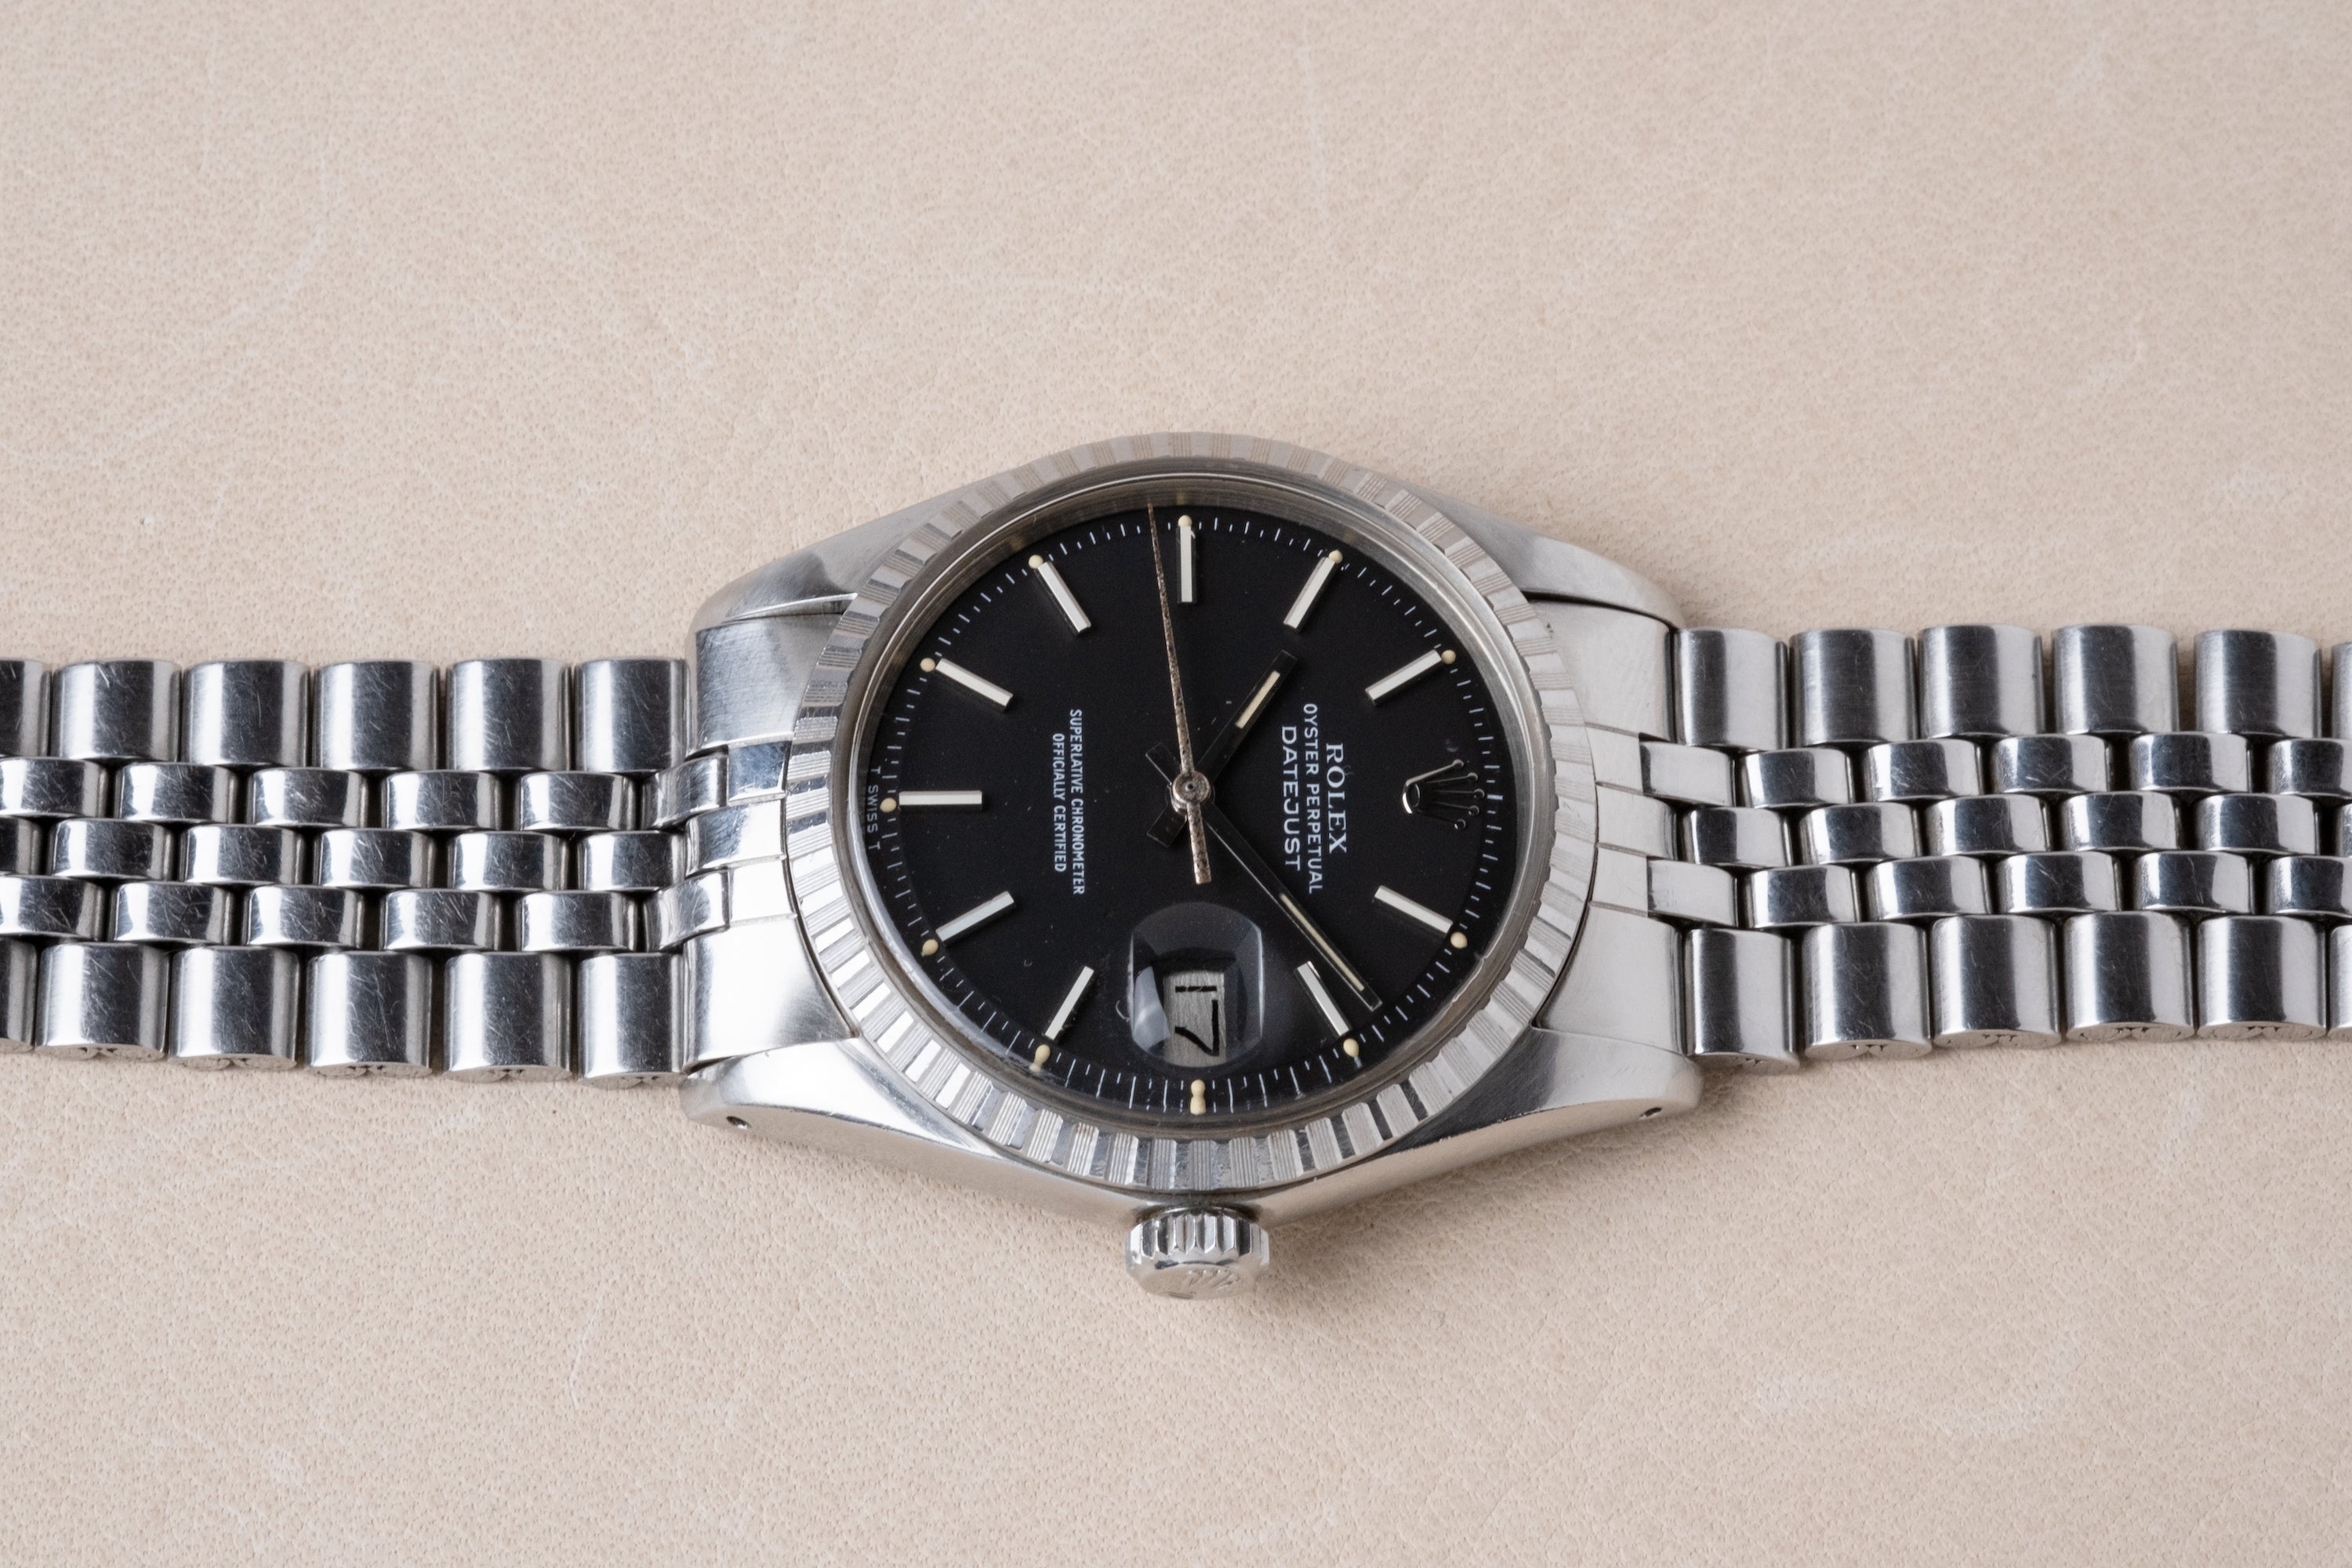 ROLEX Oyster Perpetual Datejust Ref. 1603 Matte Black Dial (1978)